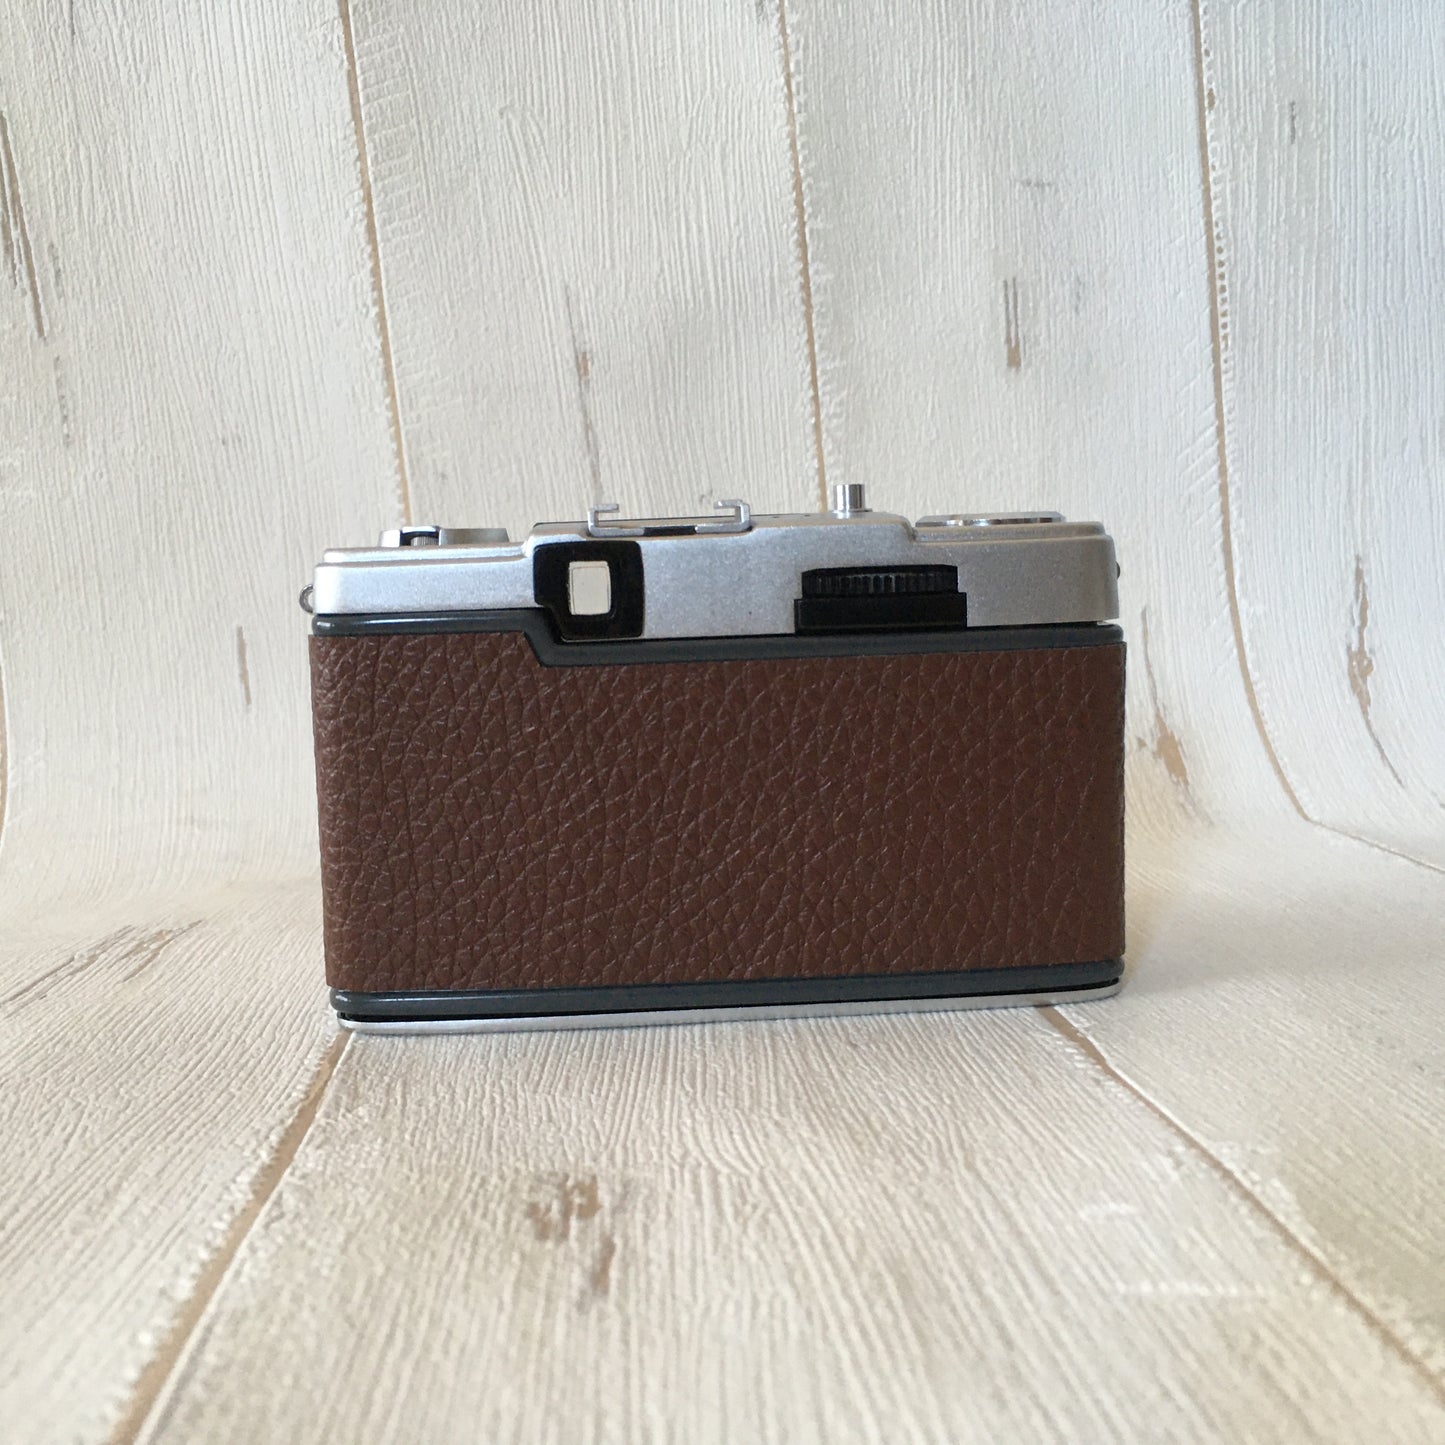 Olympus PEN EE-2  with woody brown leather